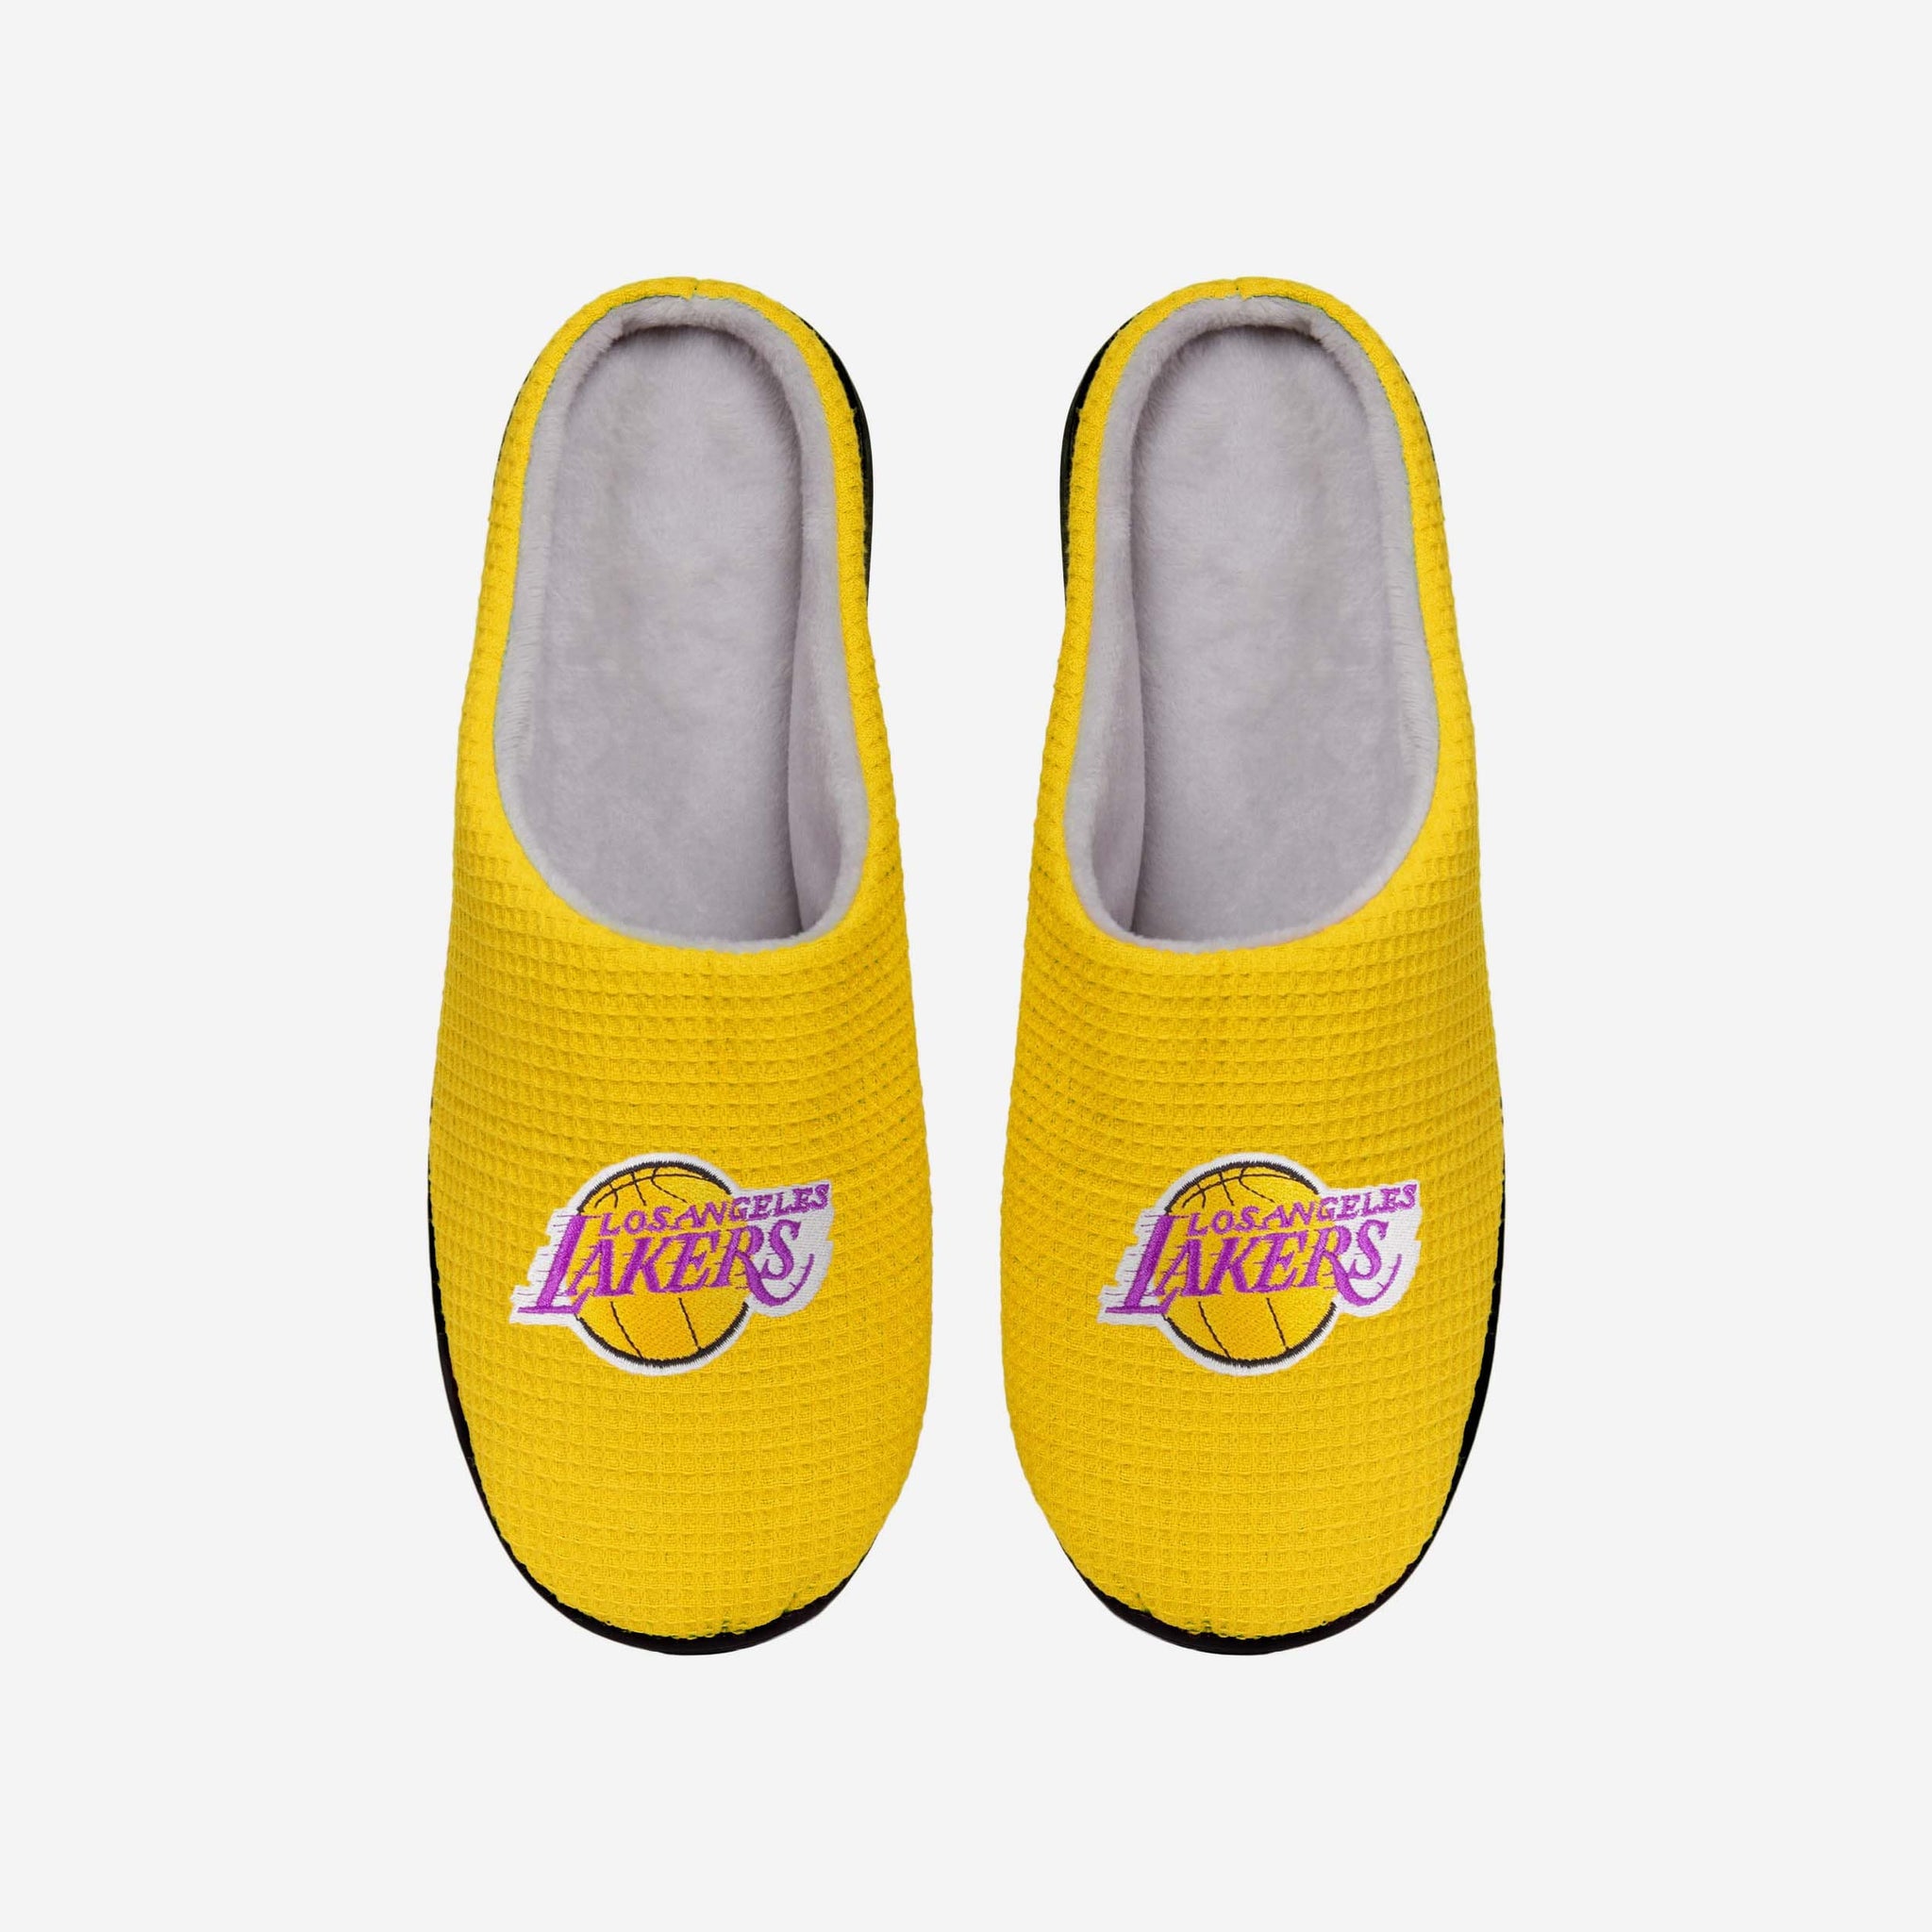 Lakers Black Friday Christmas Gifts